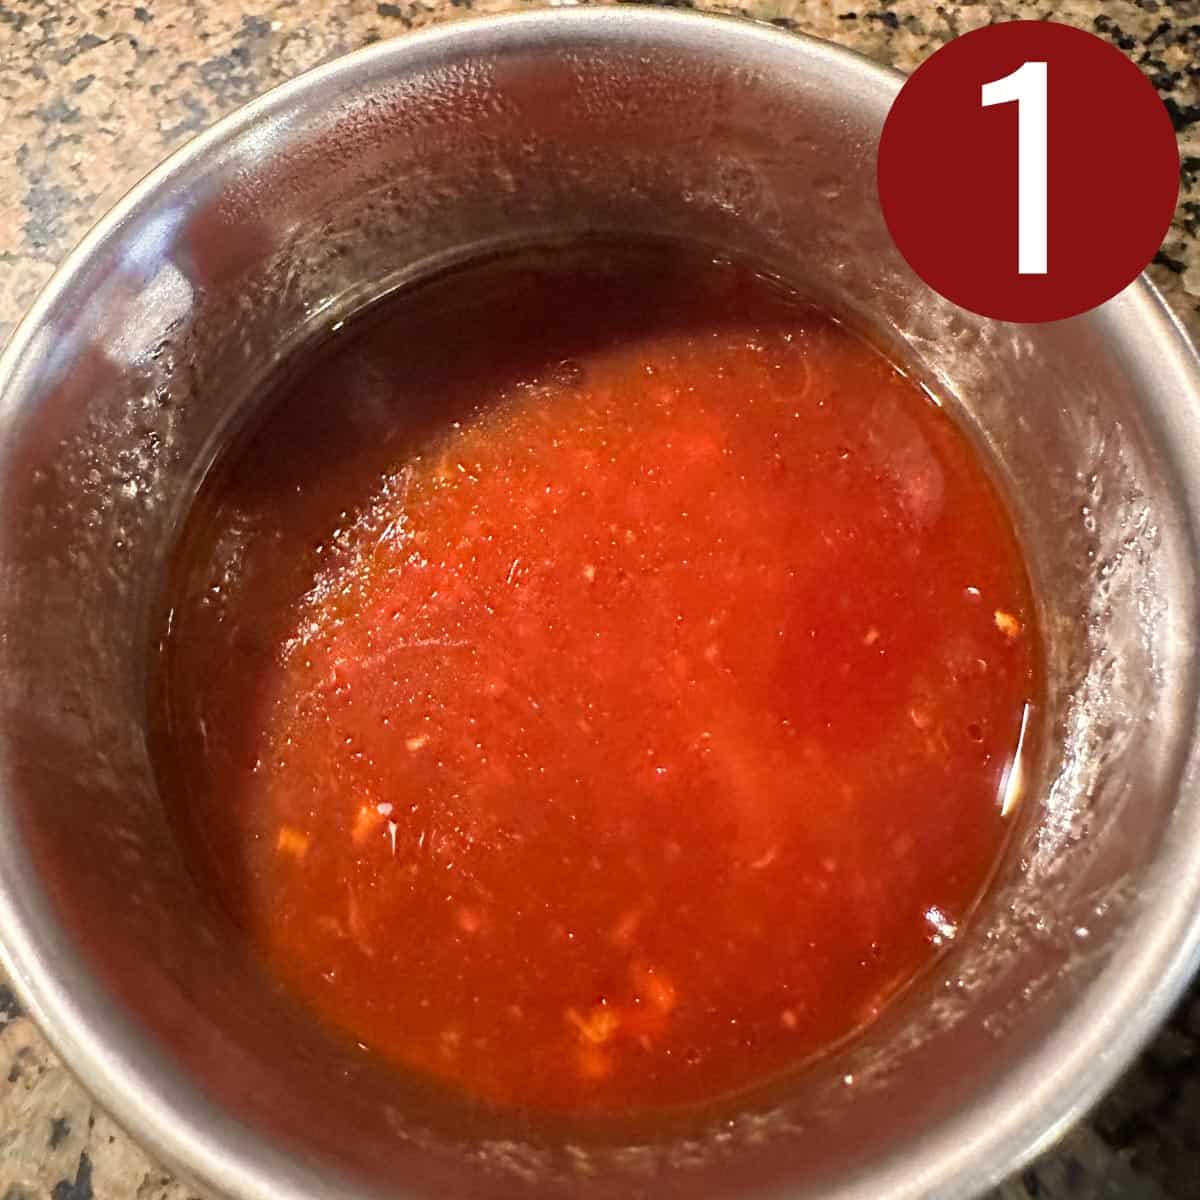 Huli huli sauce in a stainless steel bowl.